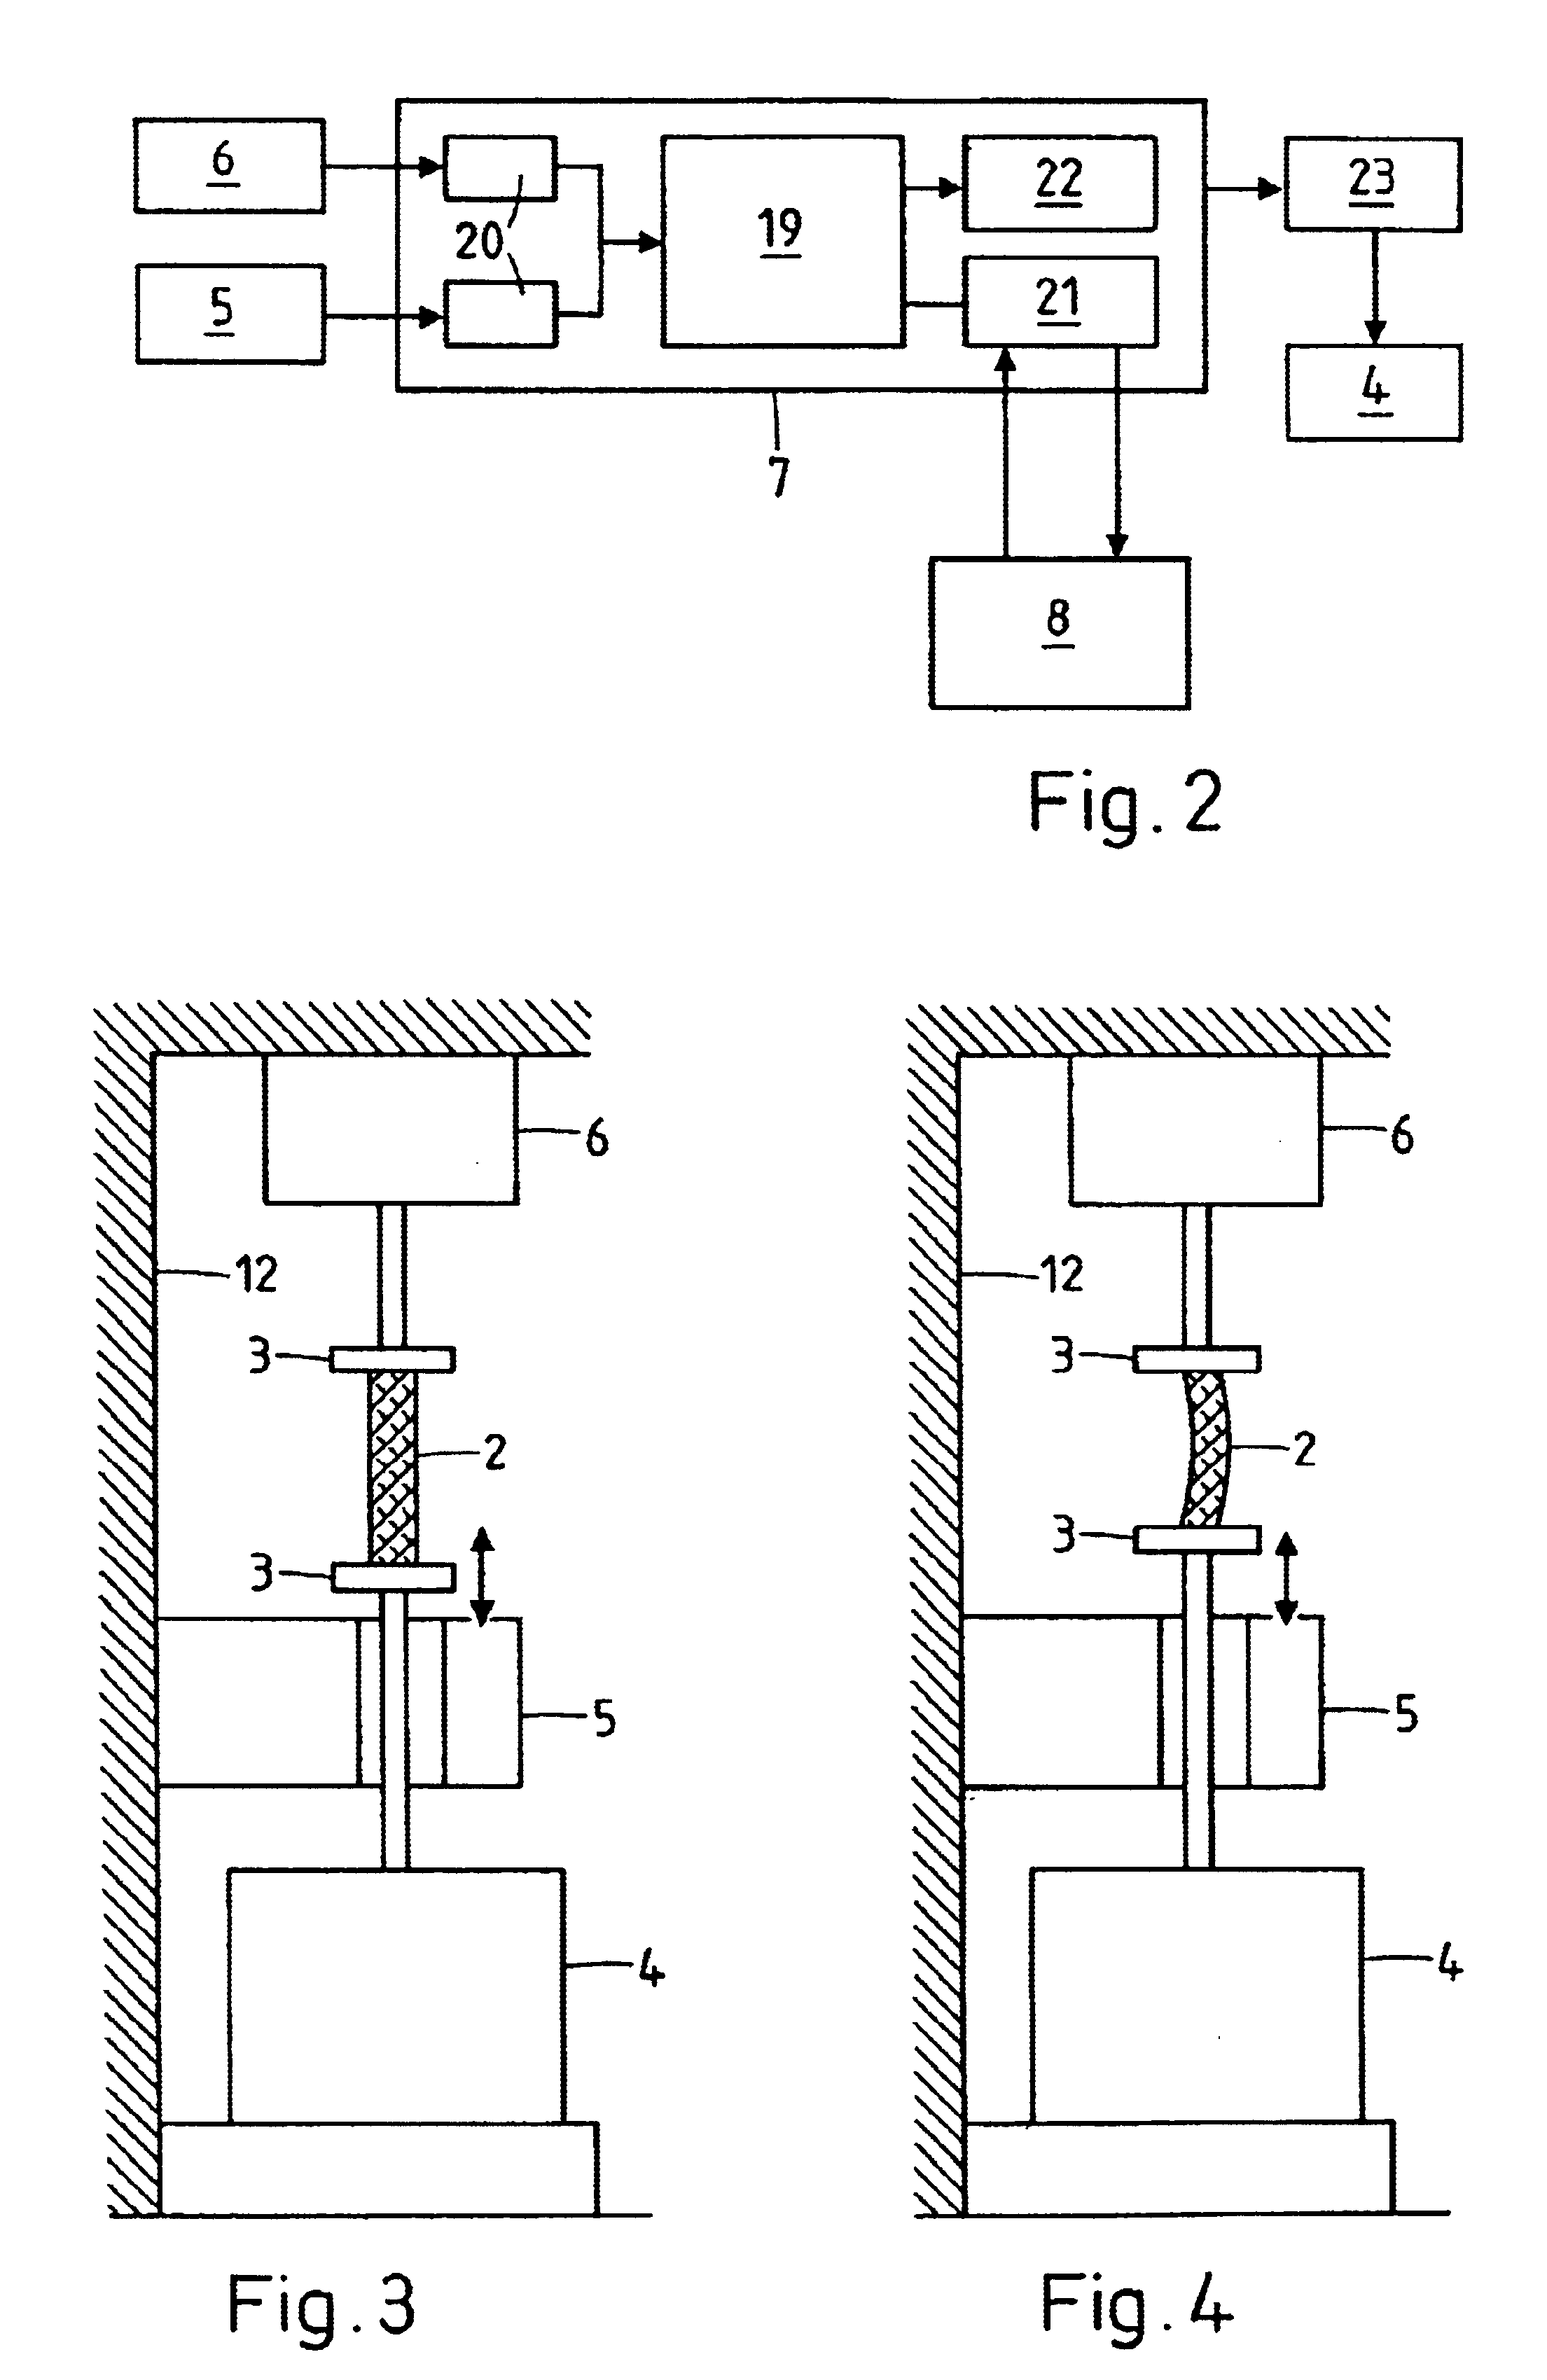 Method and apparatus for performing dynamic mechanical analyses